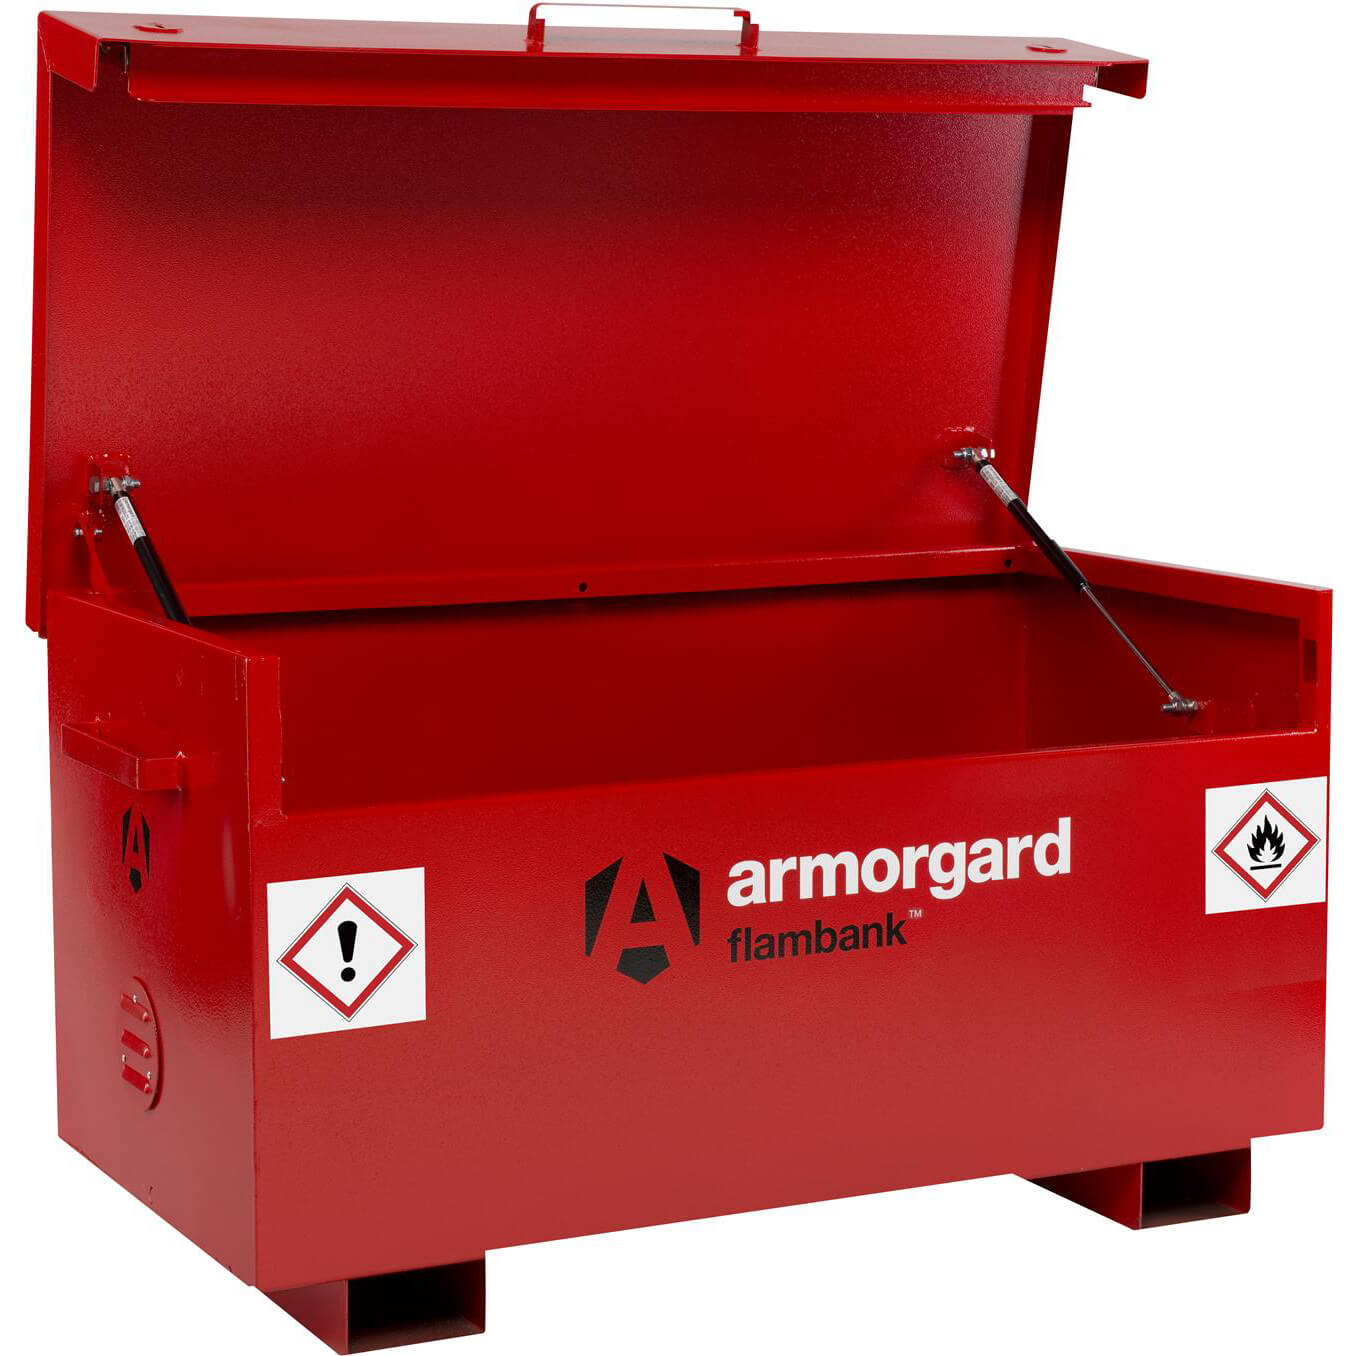 Image of Armorgard Flambank Chemical and Flammables Secure Site Storage Box 1275mm 665mm 660mm